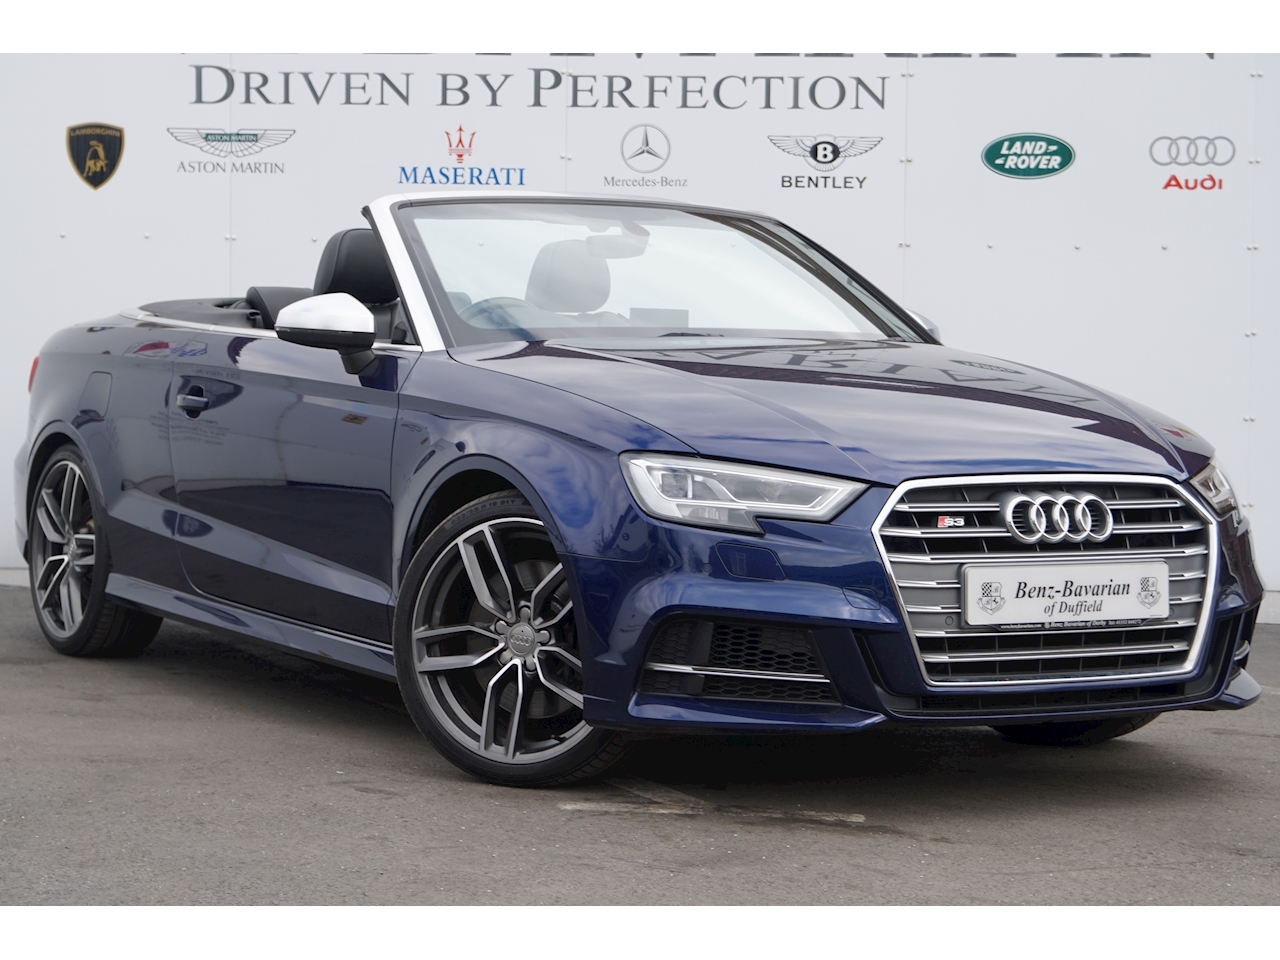 2.0 TFSI Cabriolet 2dr Petrol S Tronic quattro (s/s) (310 ps)